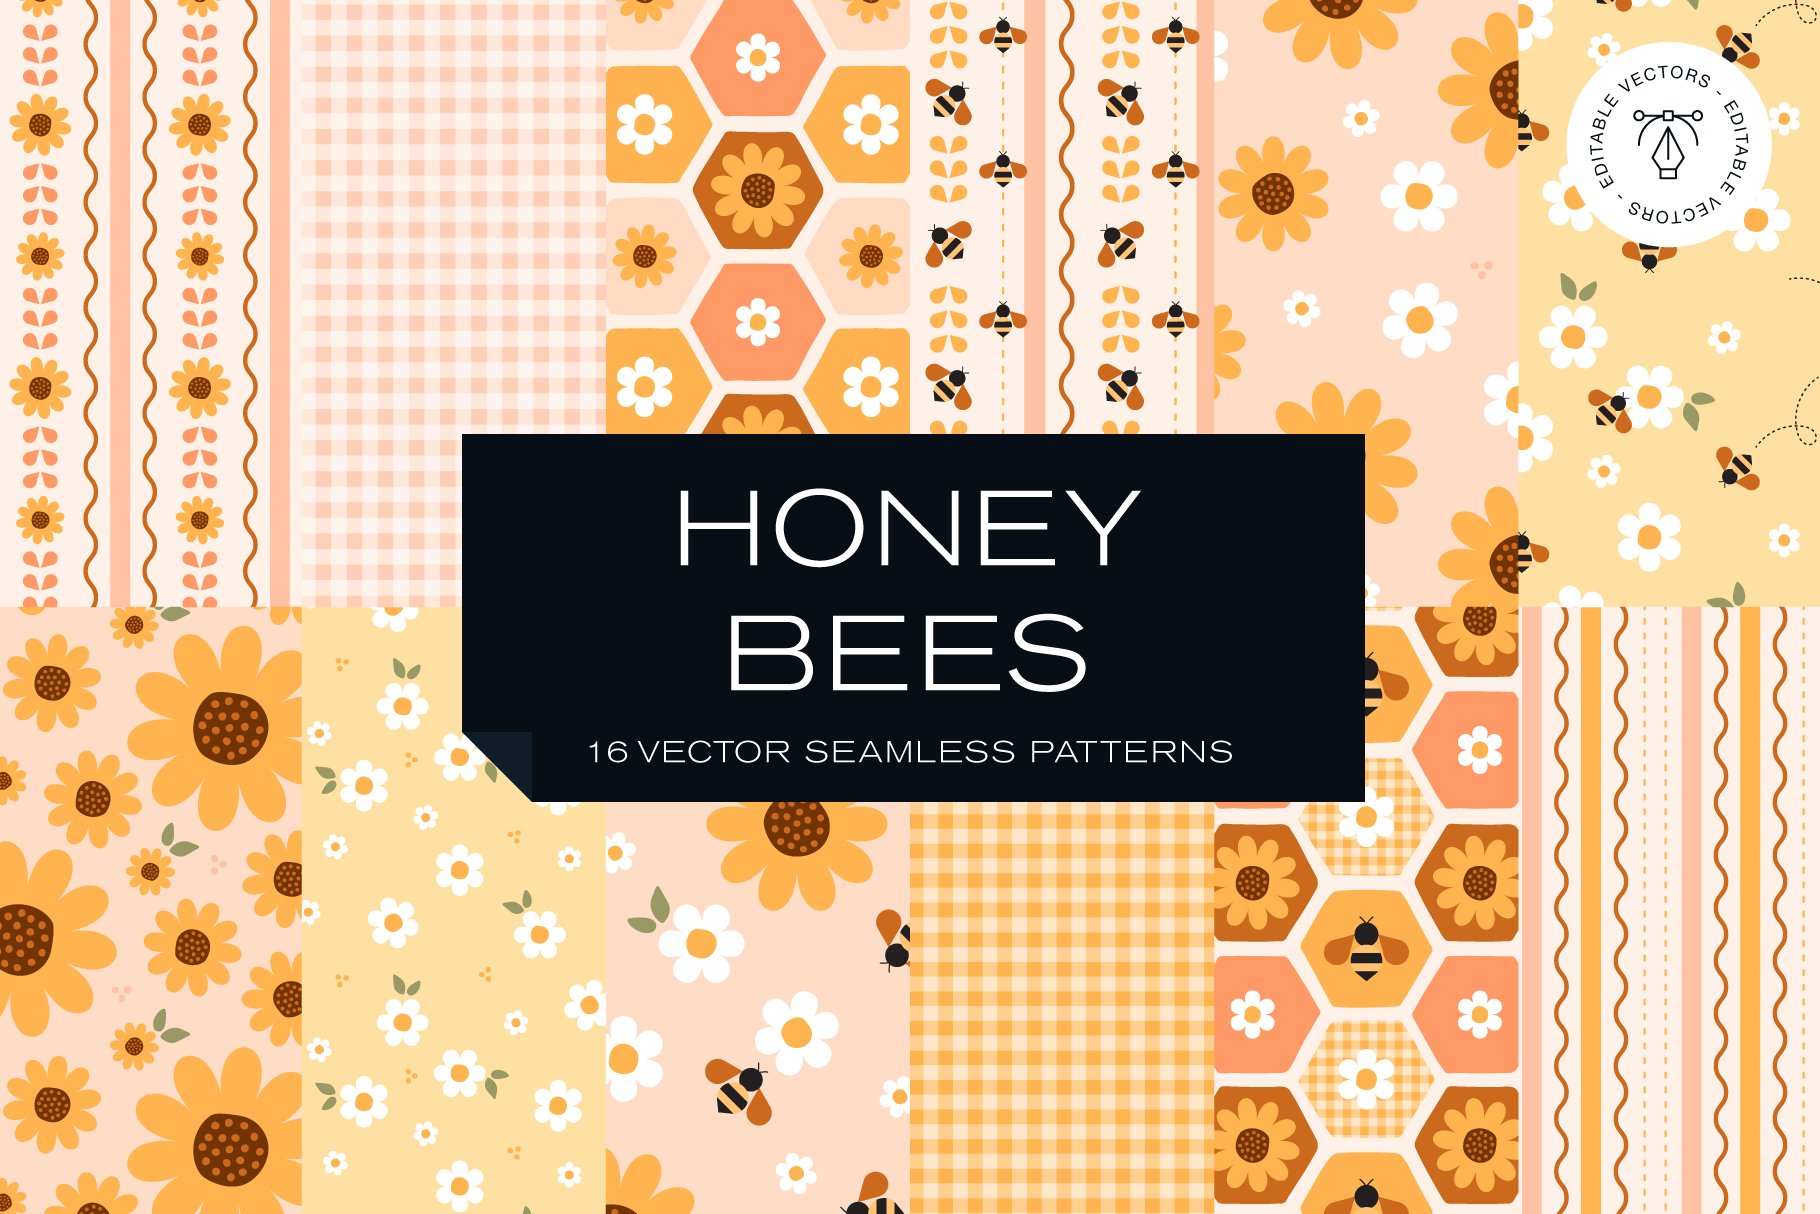 Honey Bees Pattern Collection cover image.